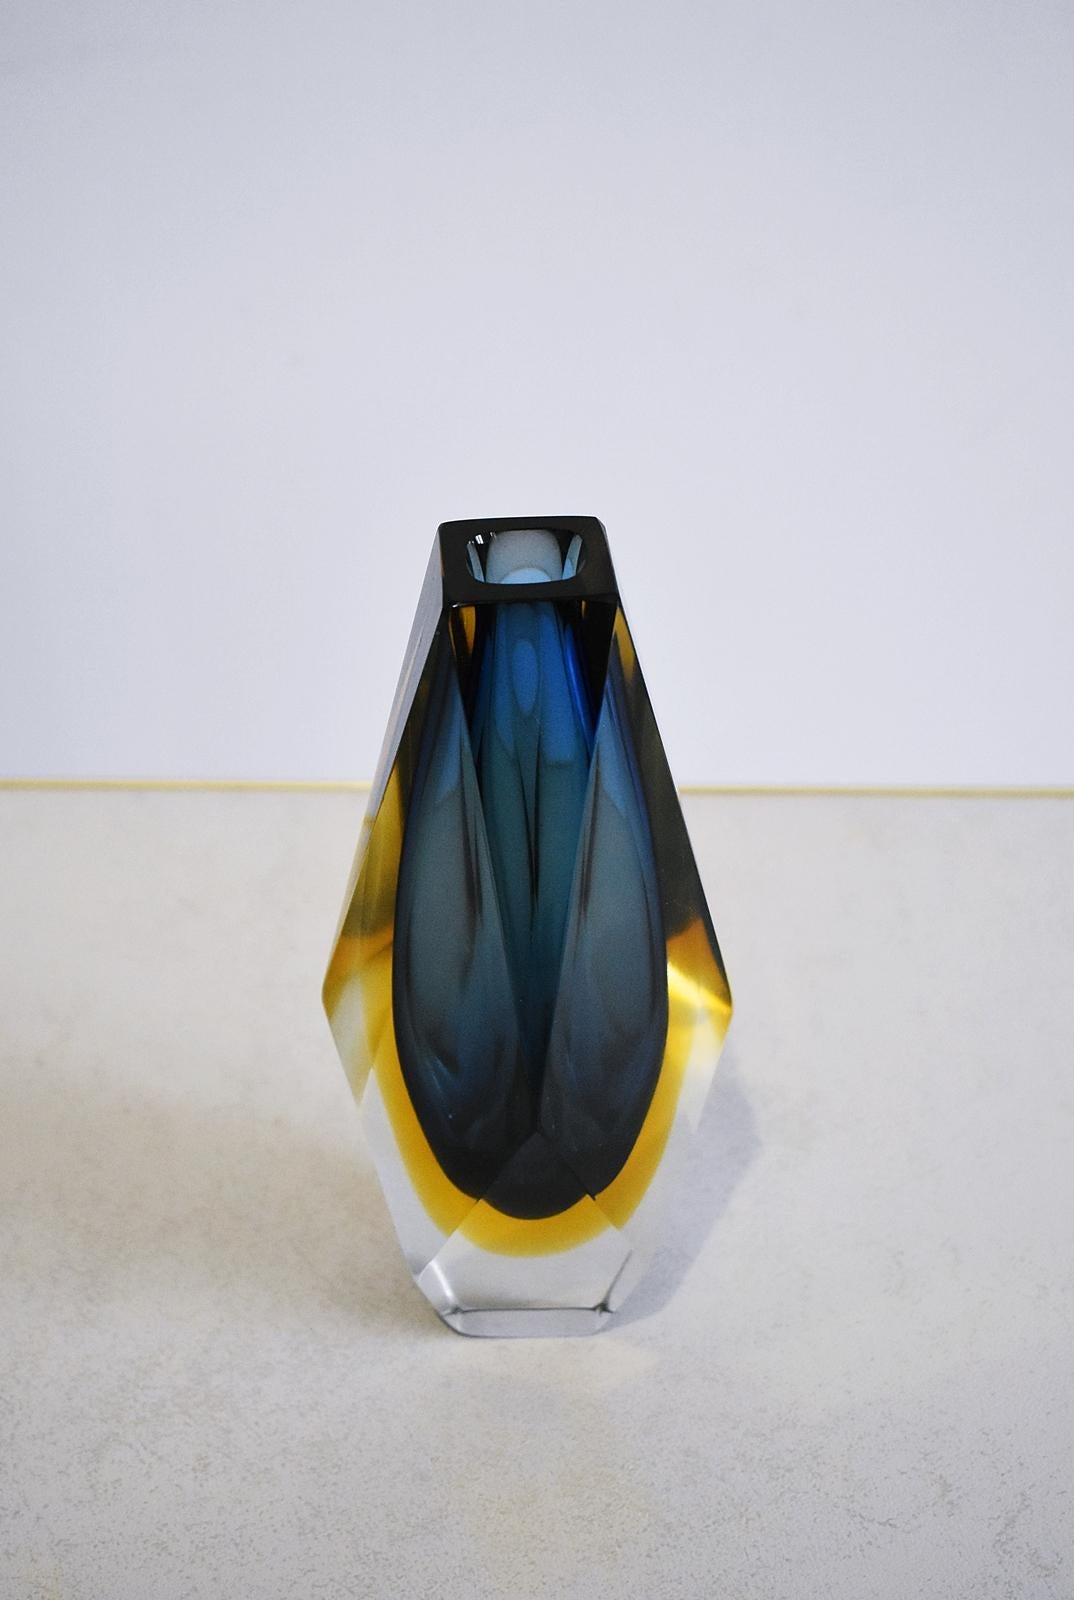 Stunning vintage Sommerso faceted glass vase in vibrant colors. Blue and yellow glass cased into clear glass. Attributed to Mandruzzato, Italy, 1960s.